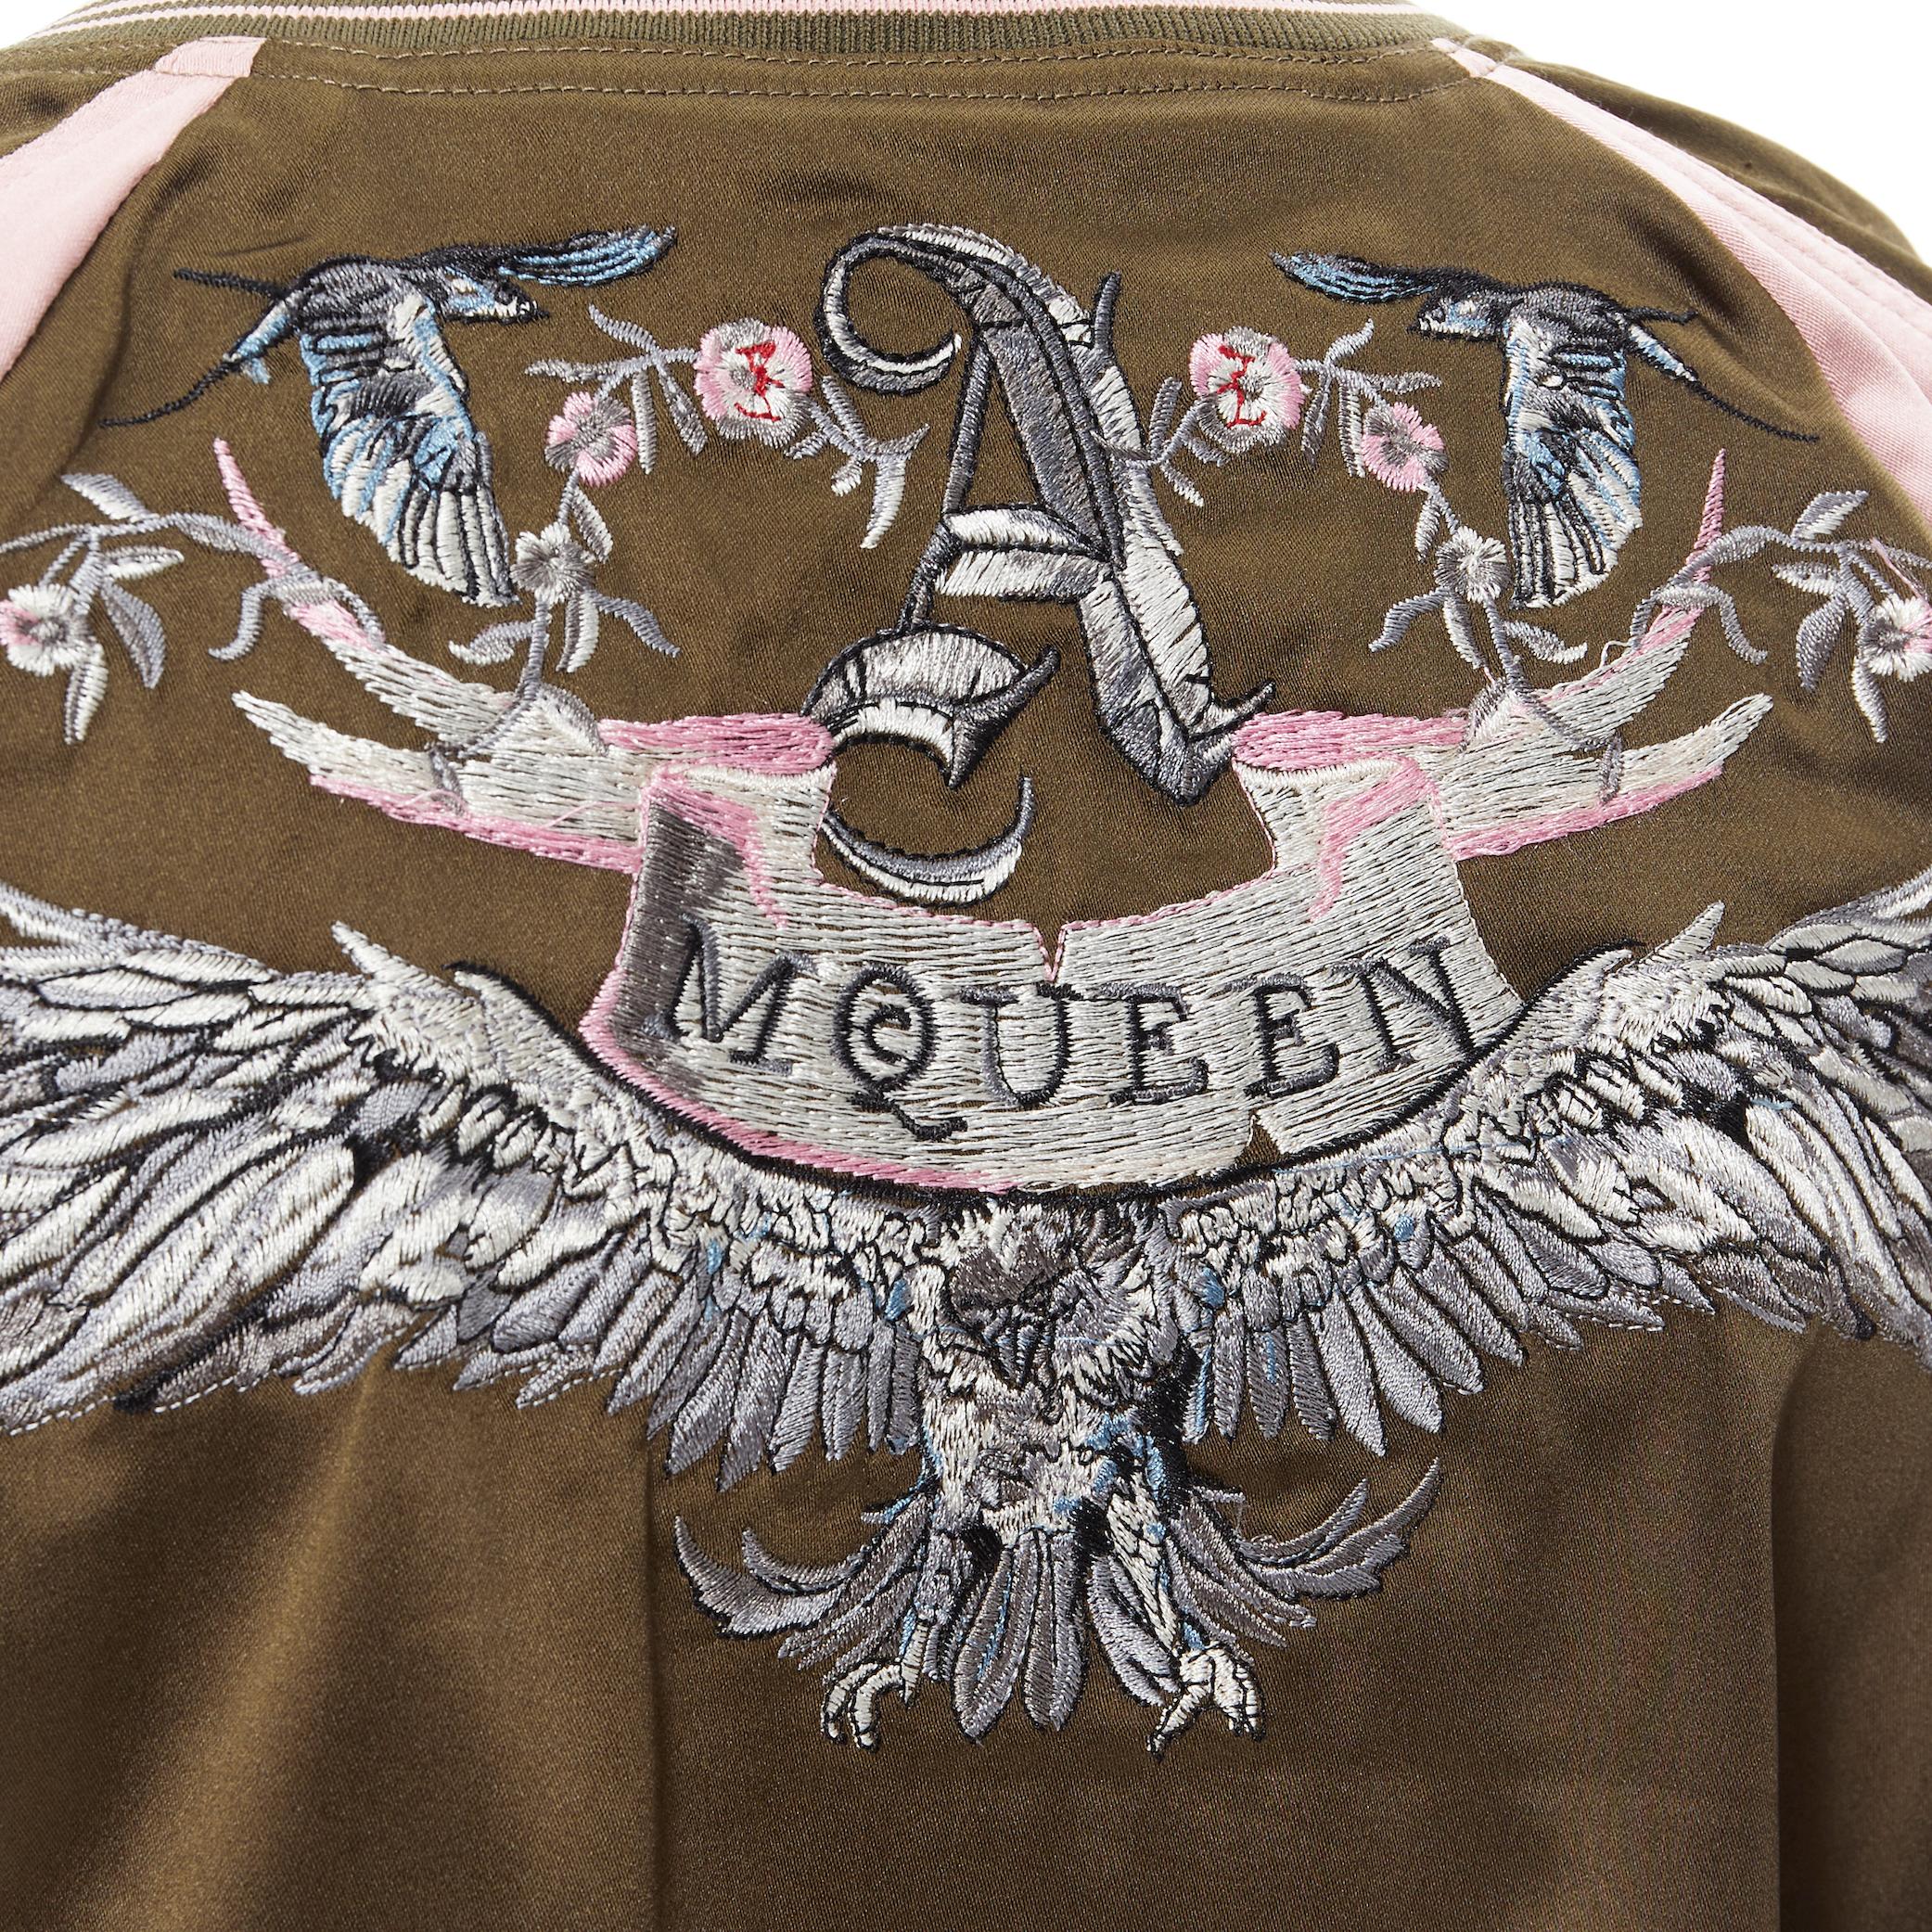 ALEXANDER MCQUEEN cotton silk green swallow embroidery varsity jacket IT36 XS Reference: TGAS/B01078 
Brand: Alexander McQueen 
Material: Cotton 
Color: Green 
Pattern: Solid 
Closure: Zip 
Extra Detail: Khaki green and pink. Swallow logo embroidery